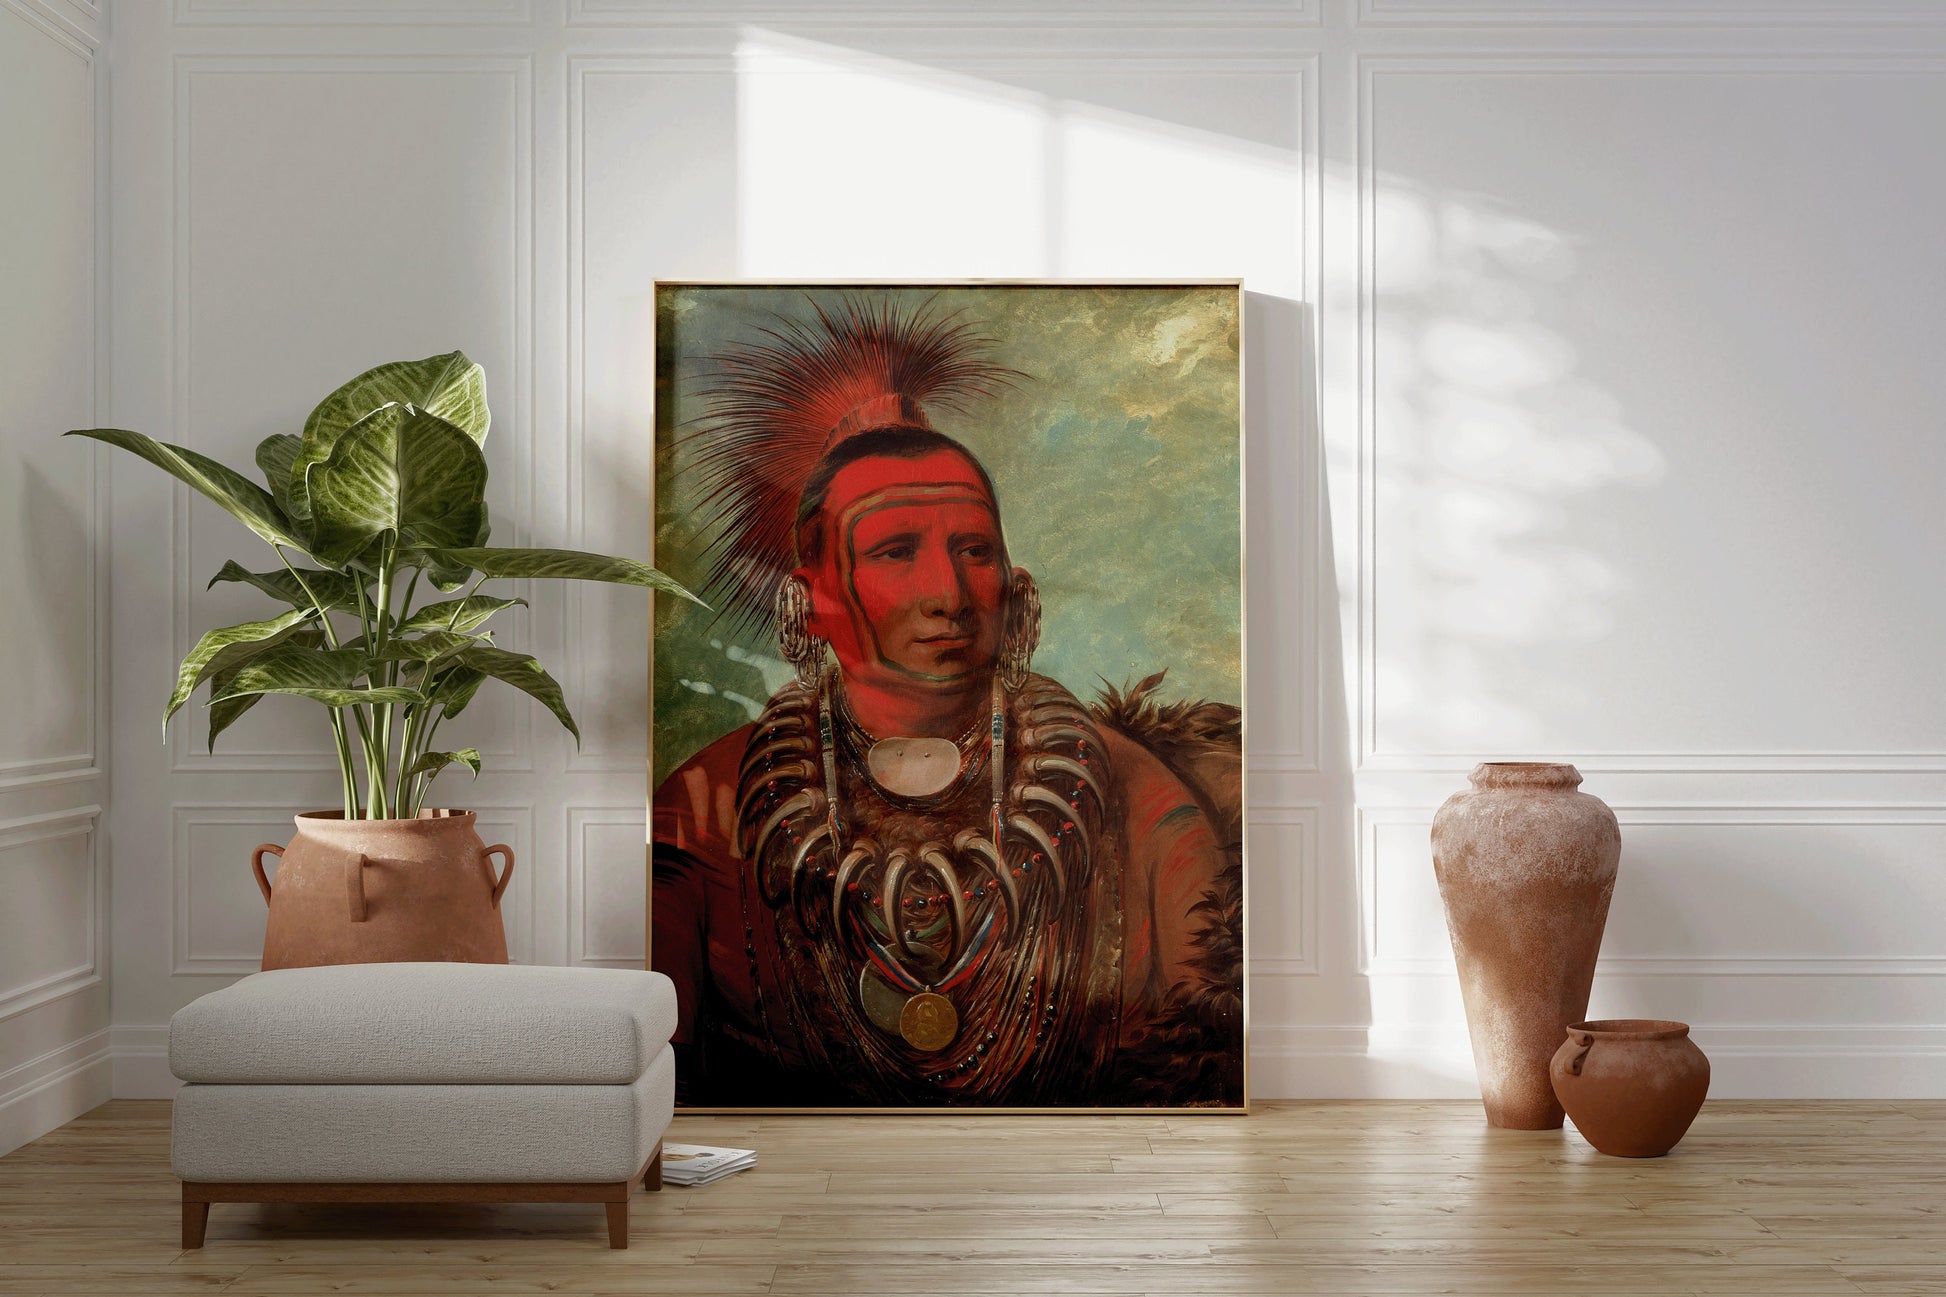 Native American Painting Little Wolf Shon Ta Yi Ga George Catlin Aboriginal Poster Portrait Print Modern Gallery Framed Ready to Hang